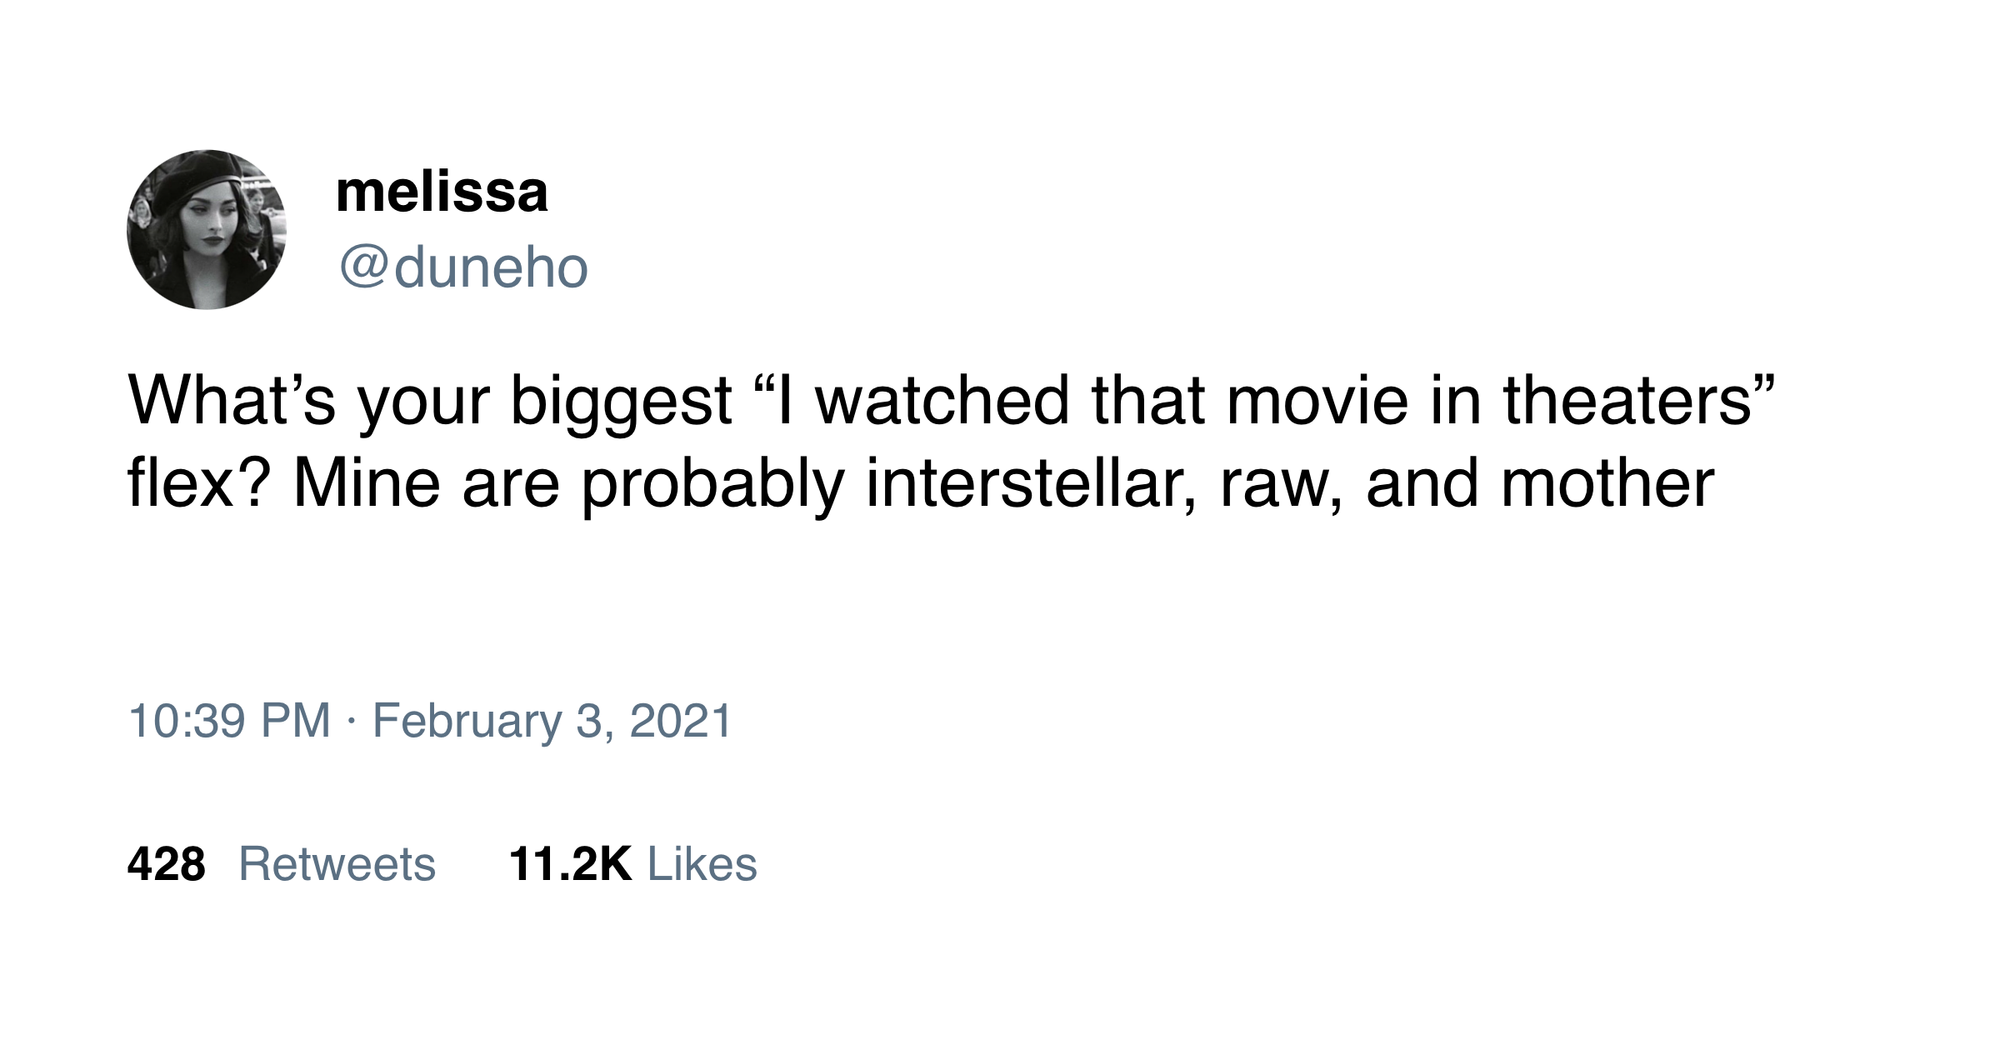 @duneho on Twitter: "What's your biggest 'I watched that movie in theaters' flex? Mine are probably interstellar, raw, and mother"